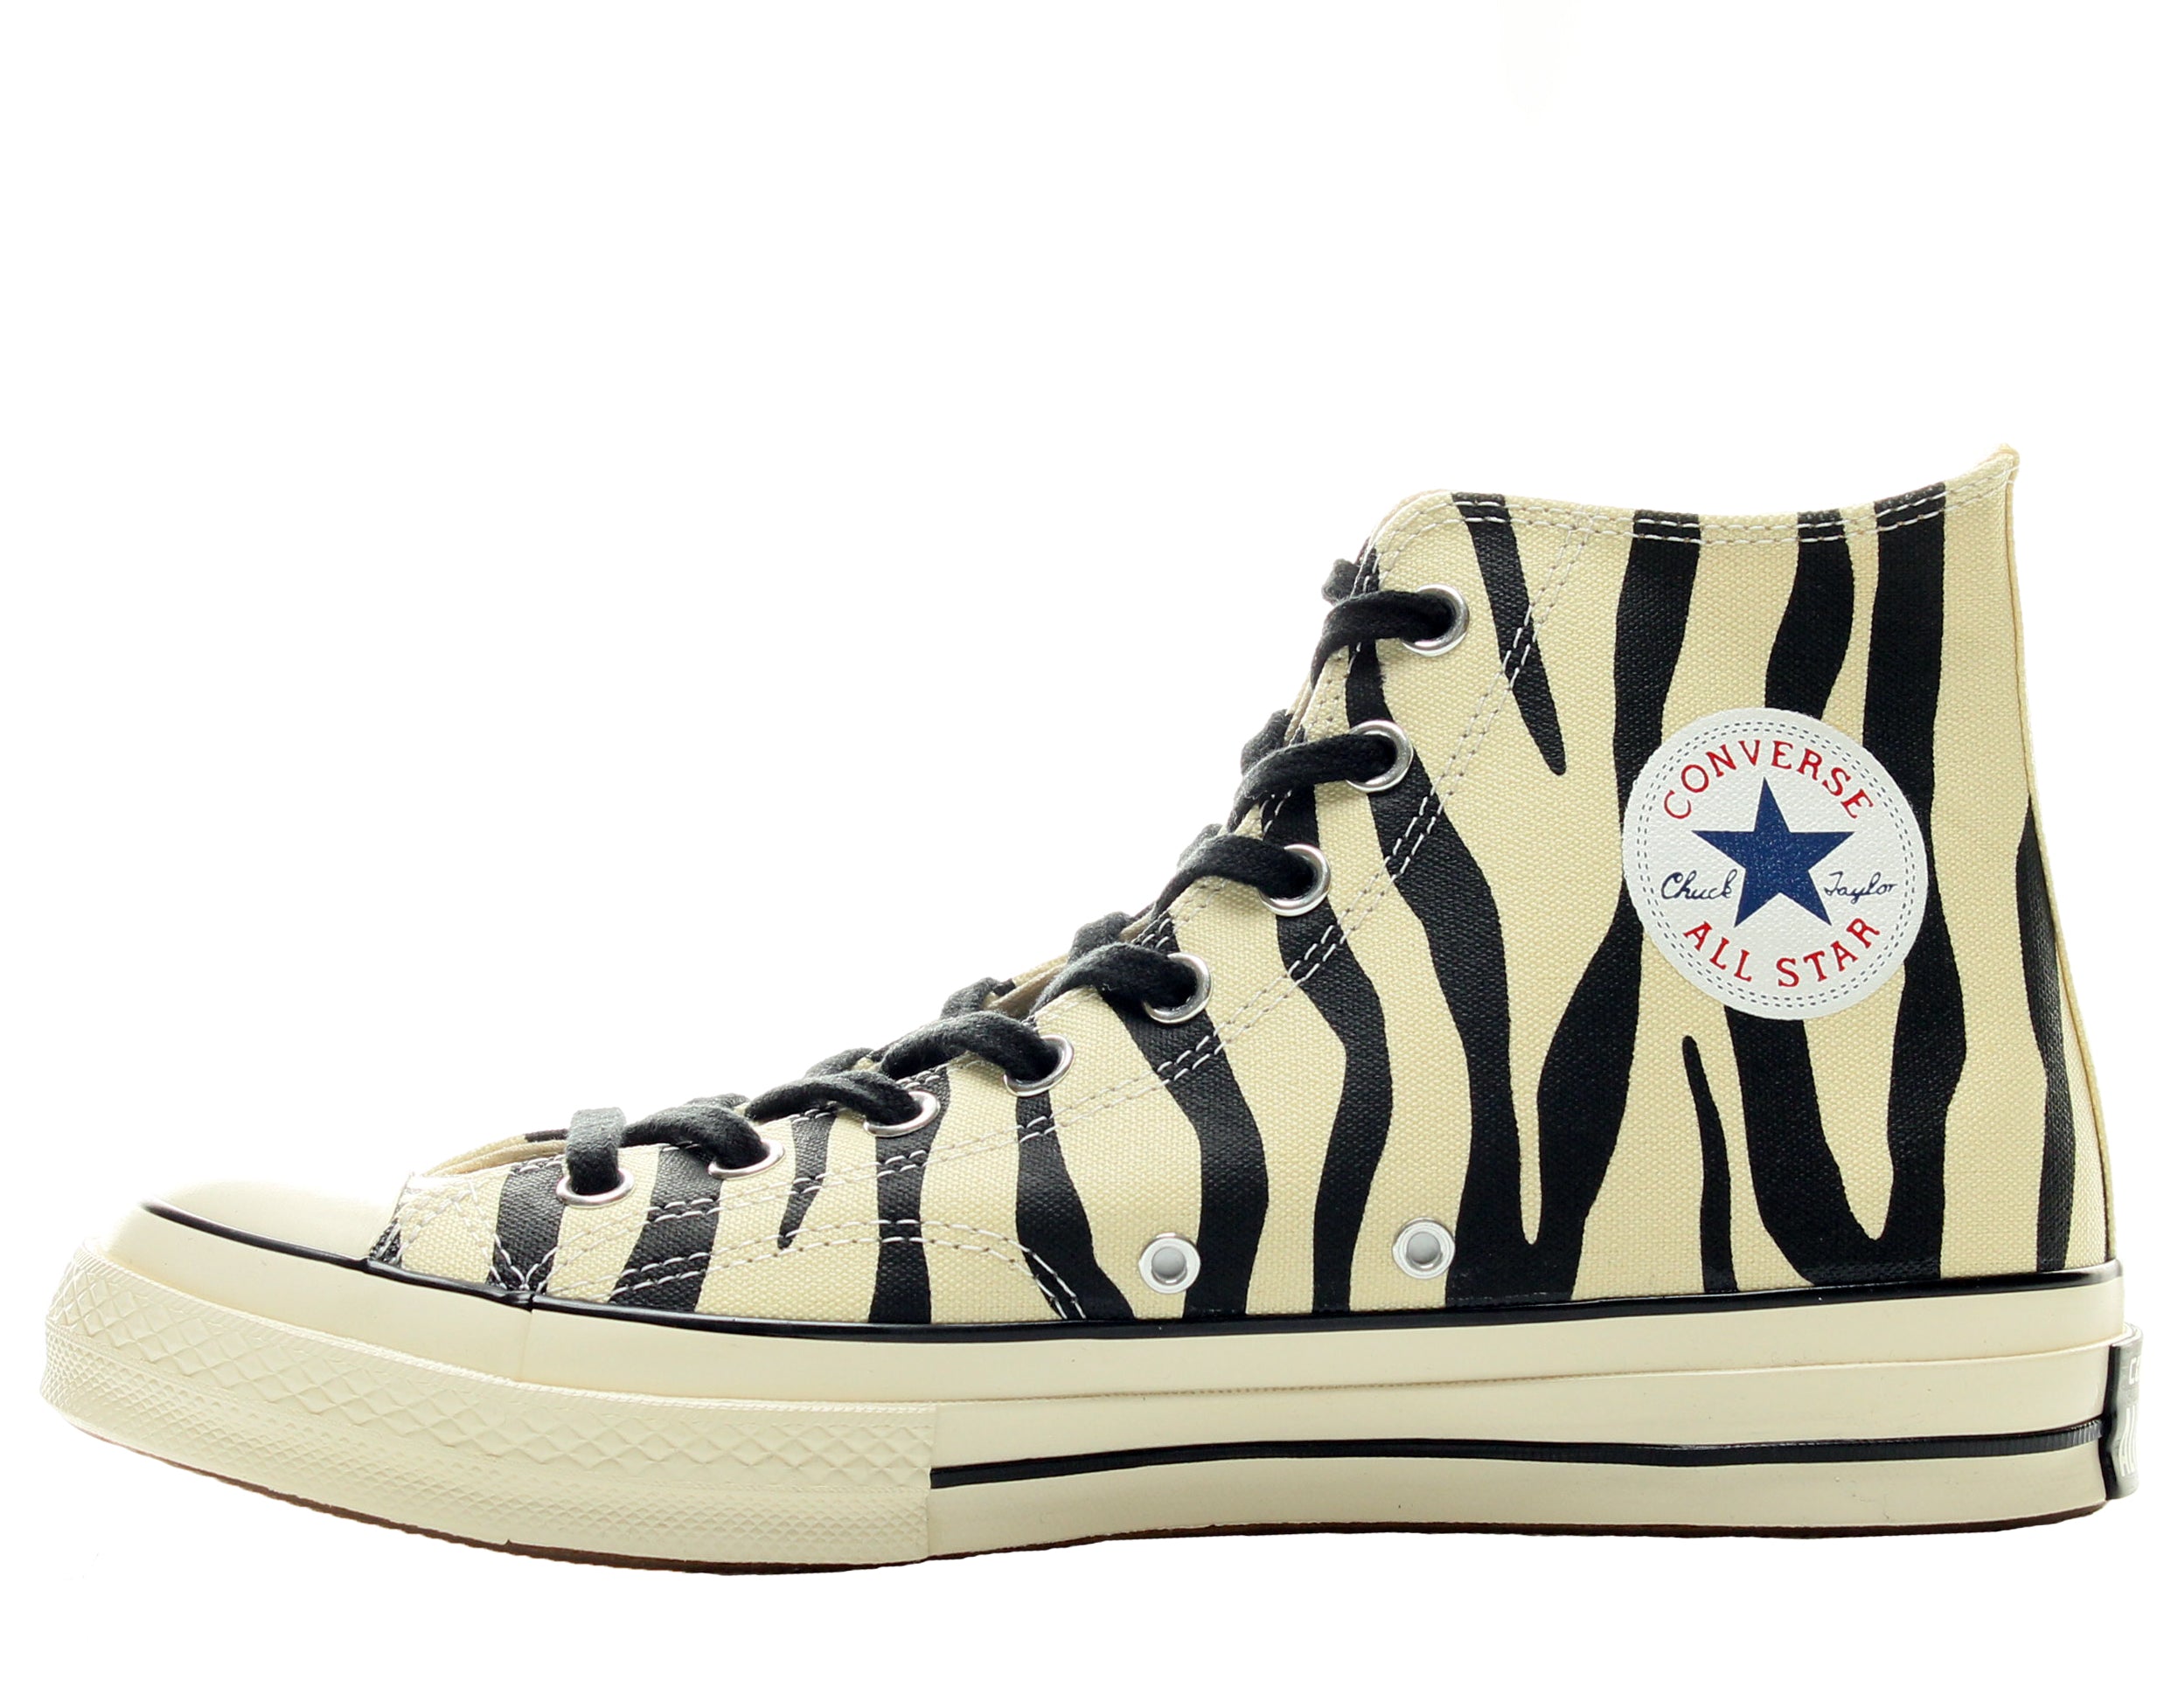 Converse Chuck Taylor All Star 70' High Top Sneakers